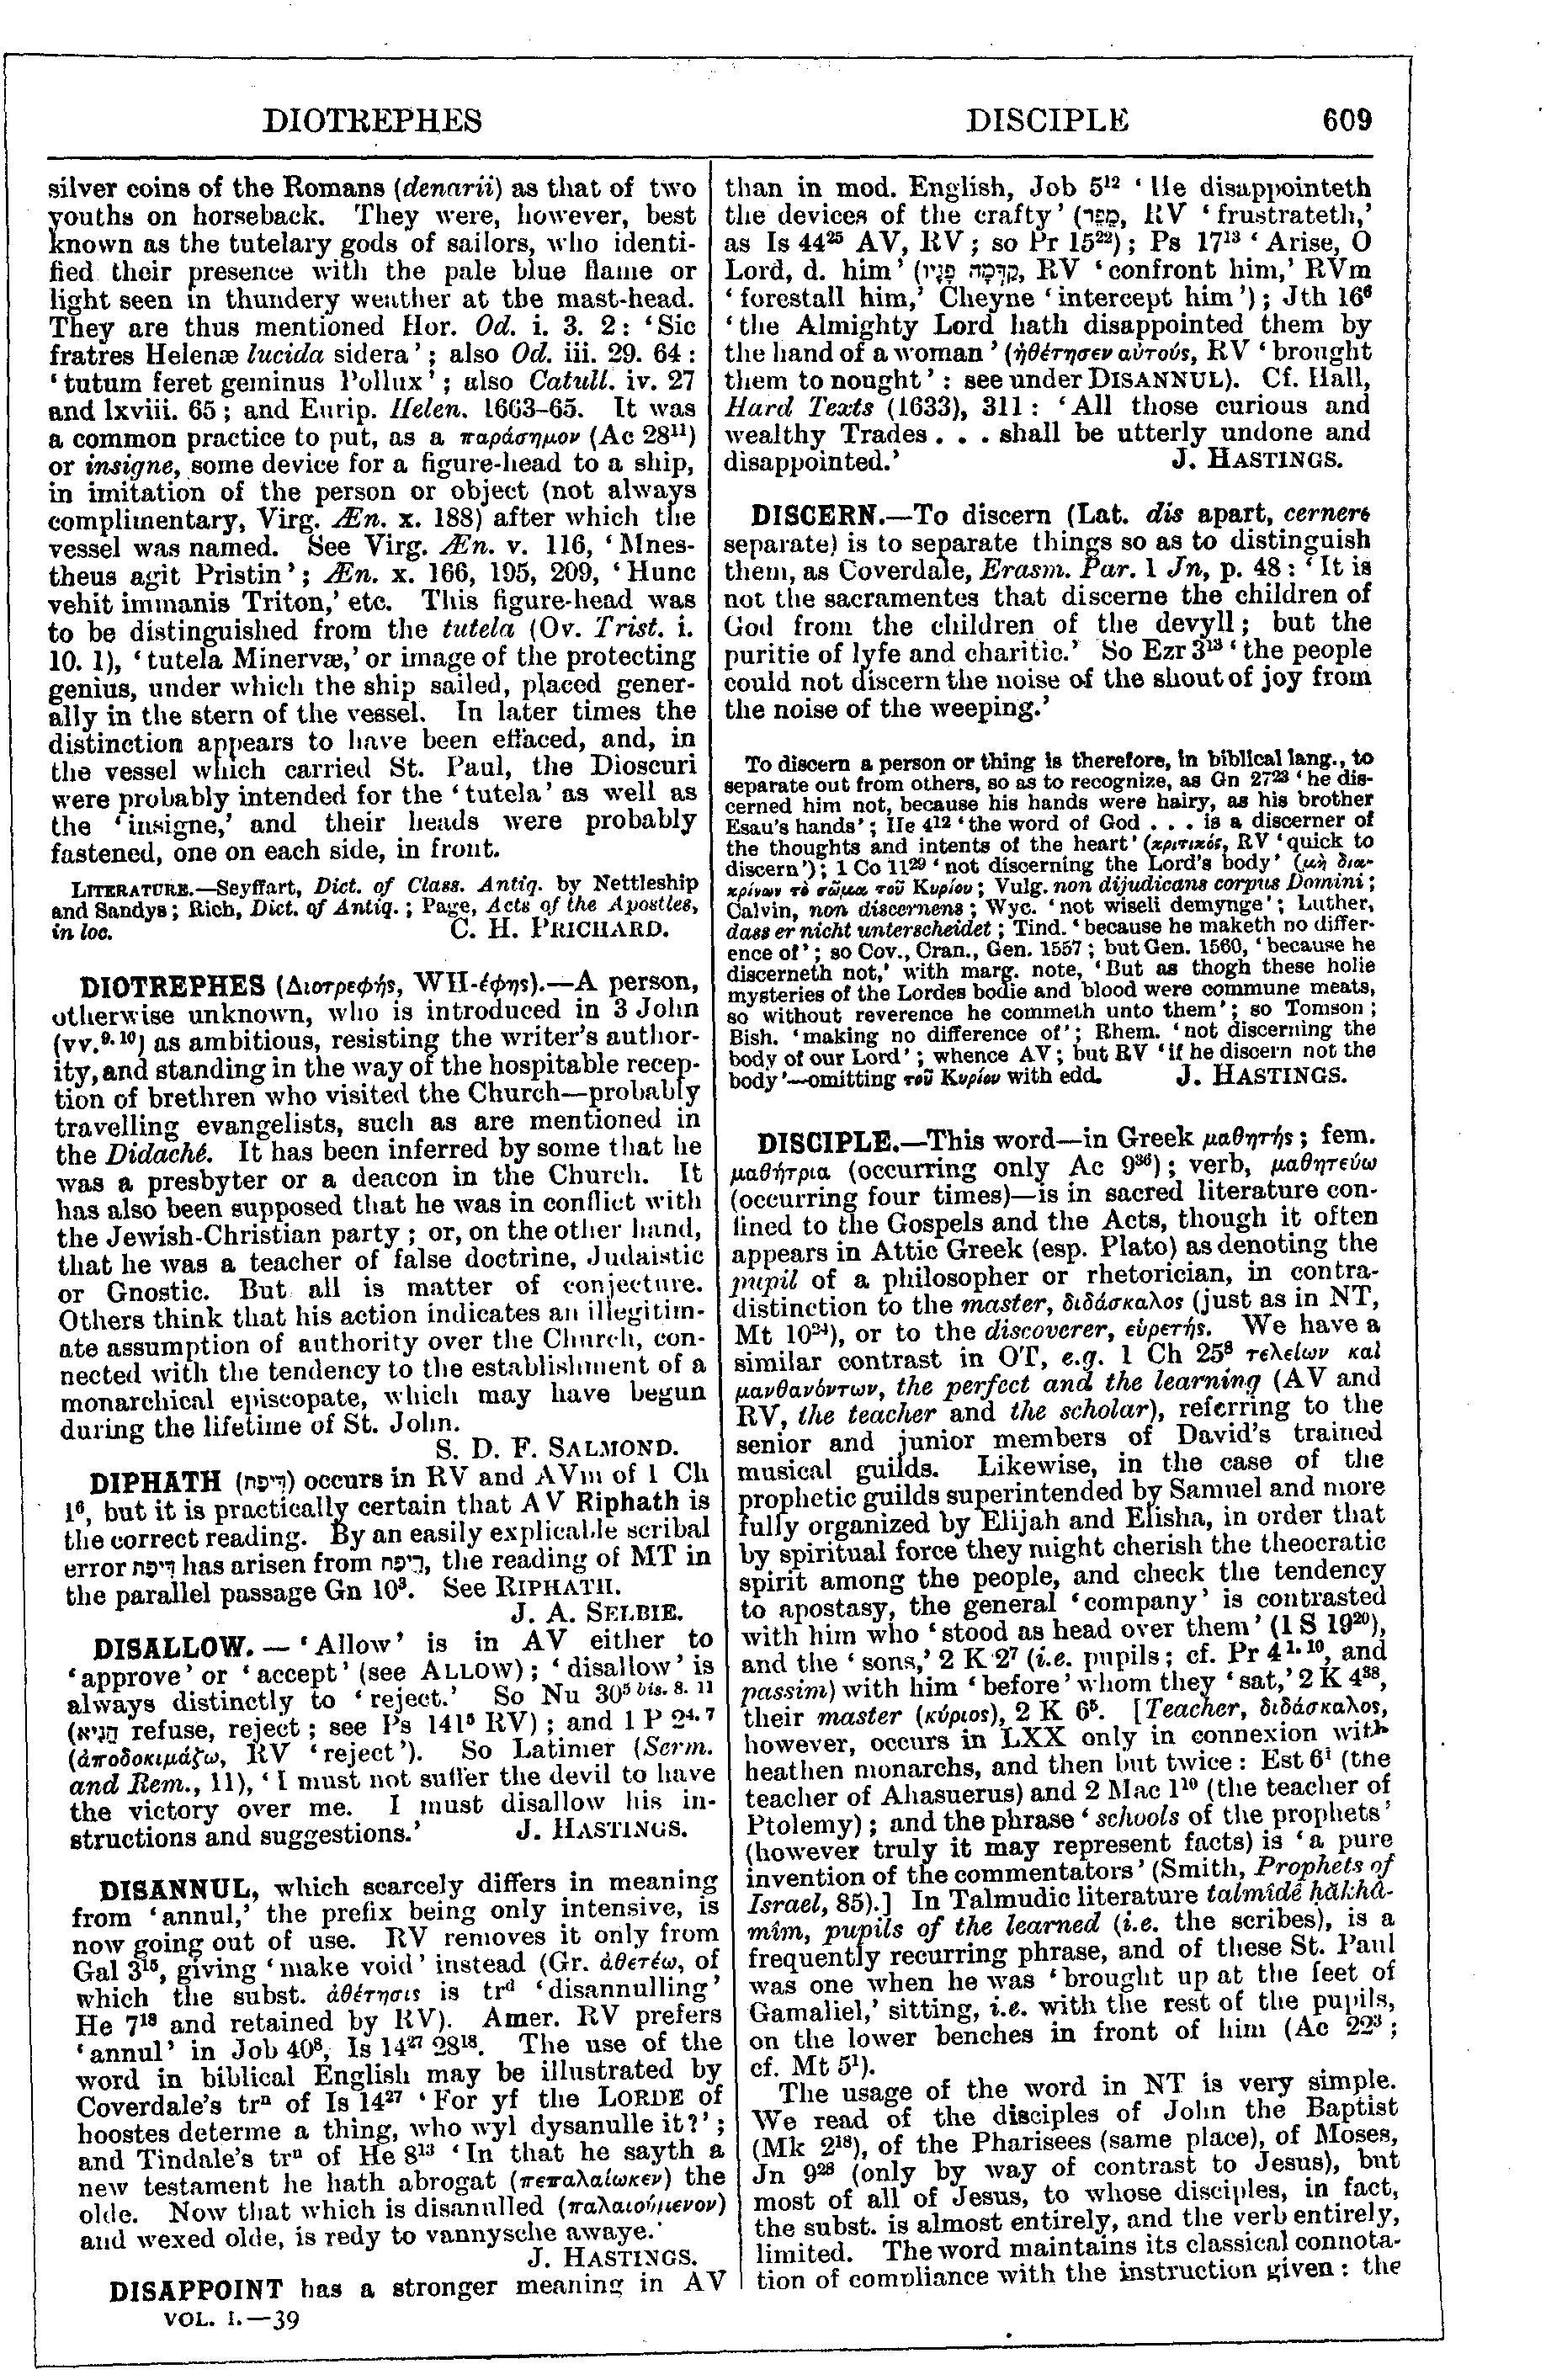 Image of page 609